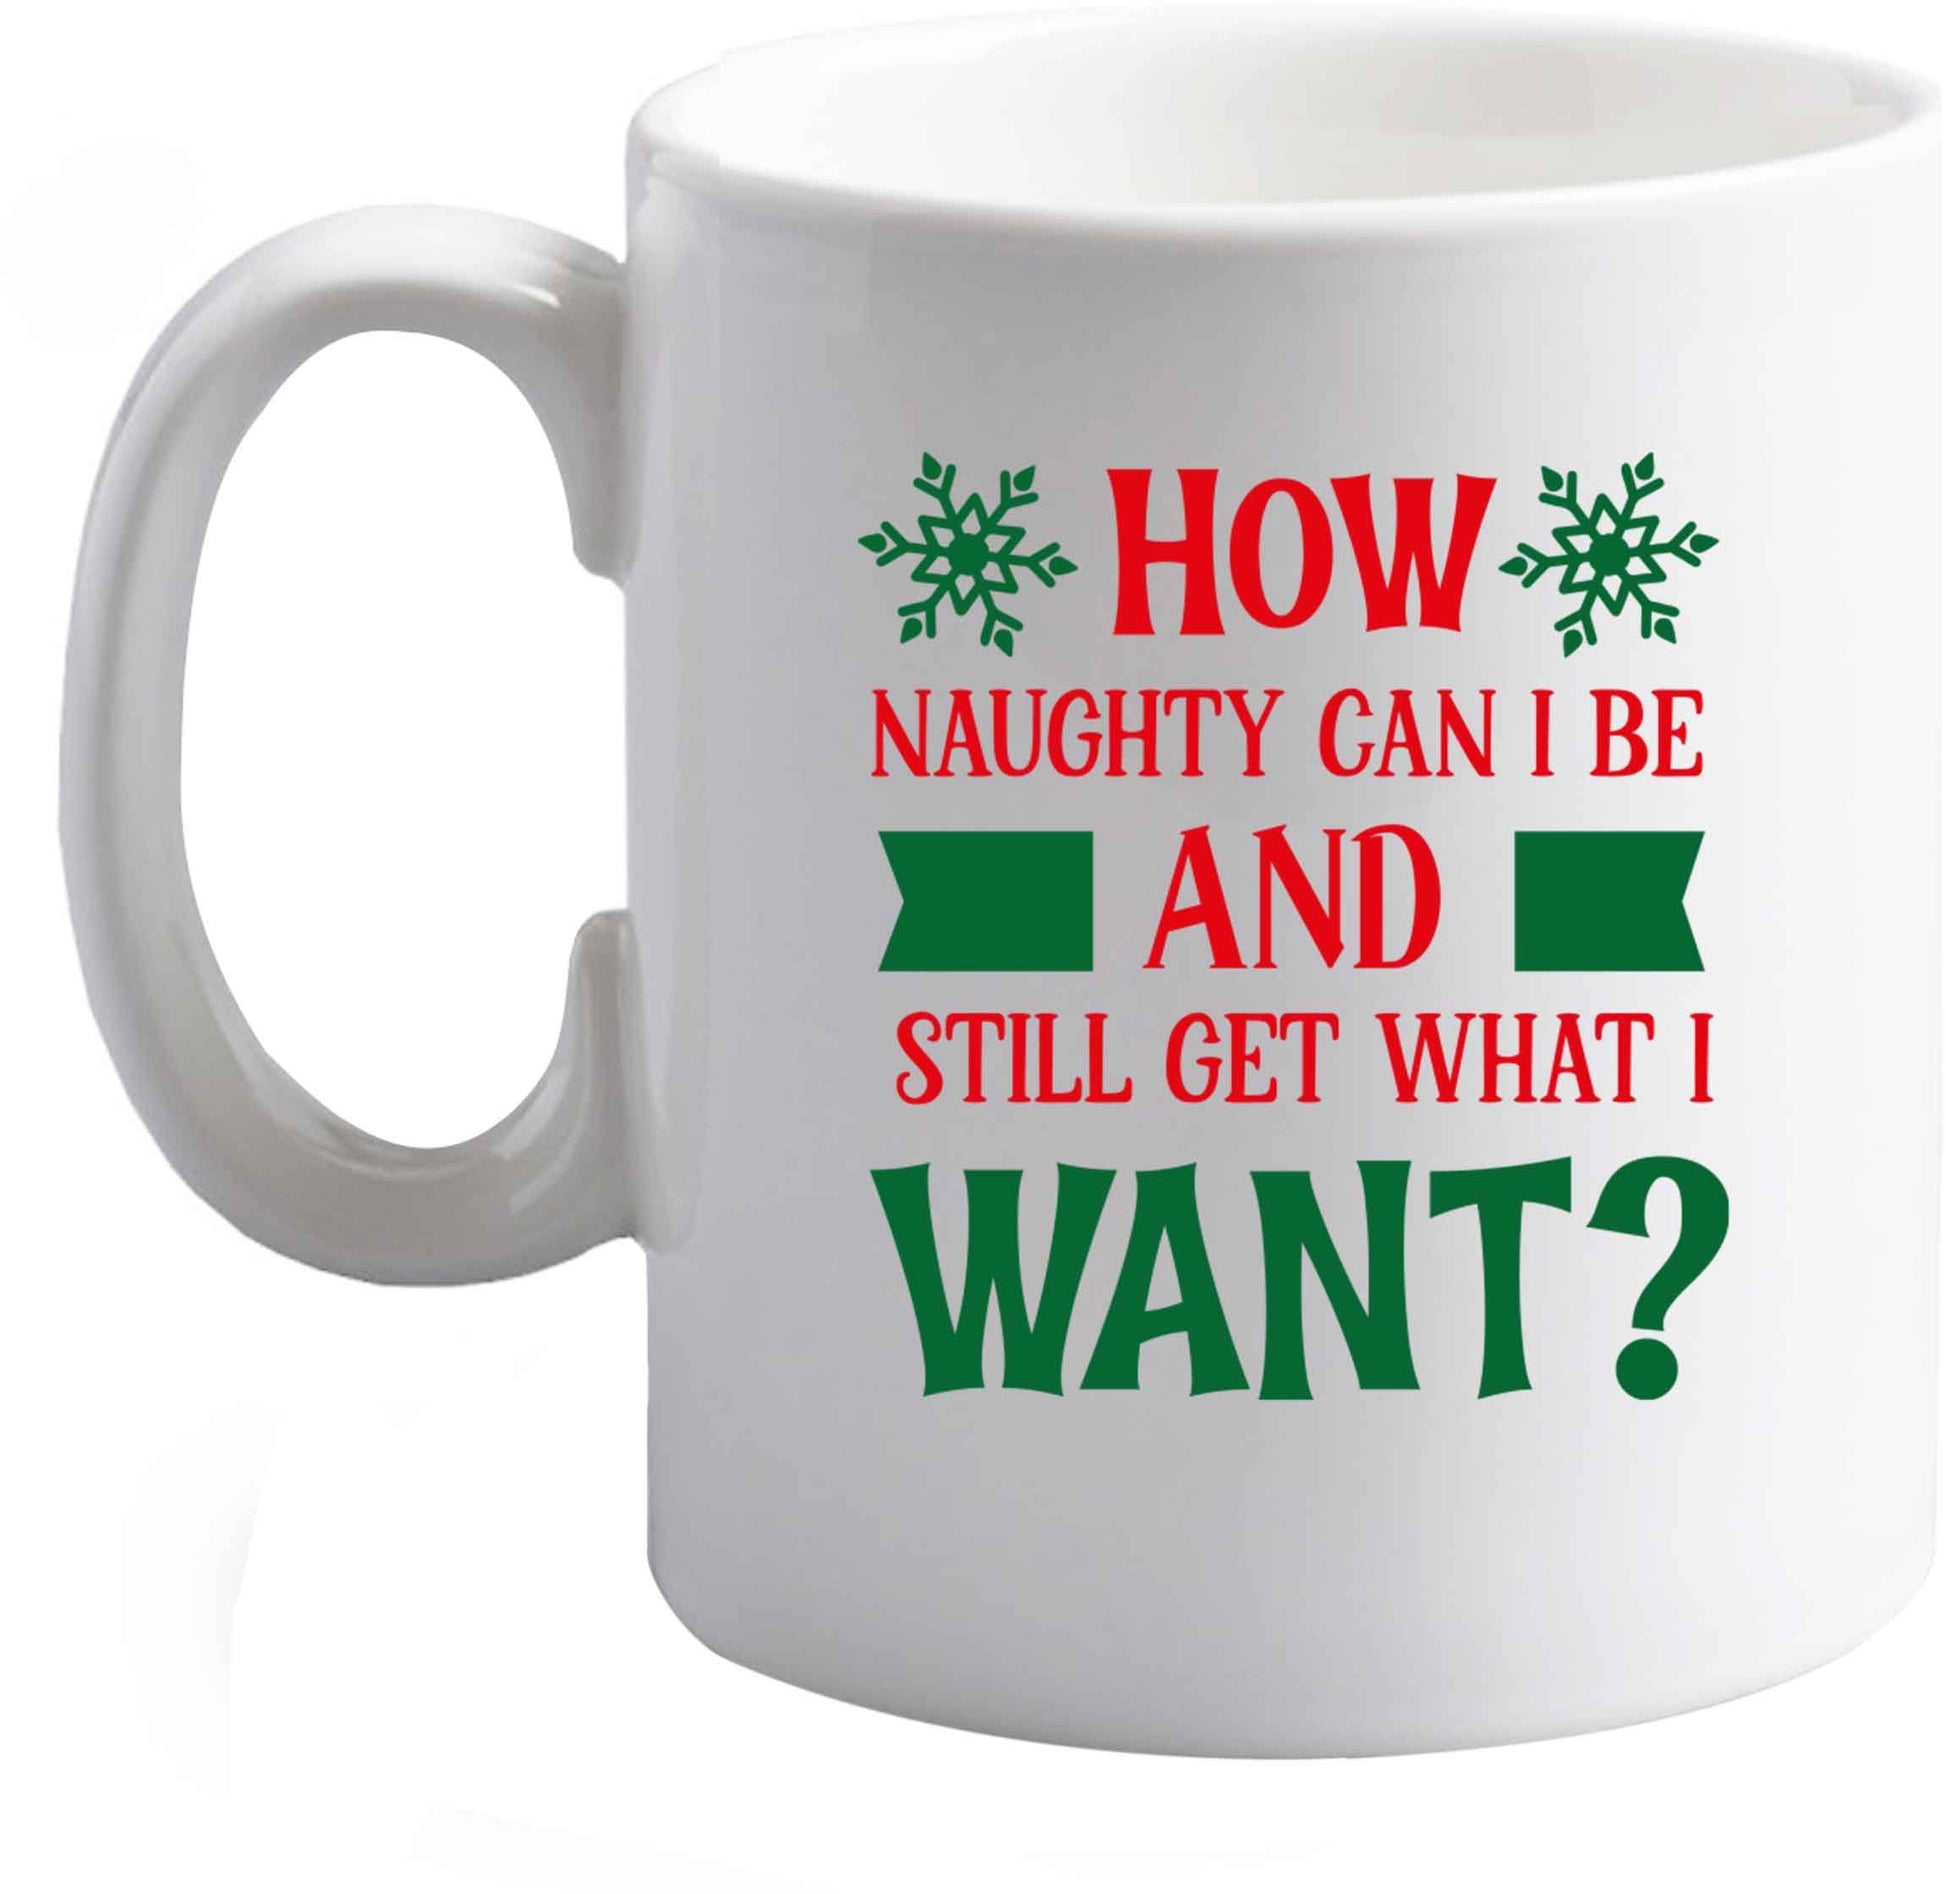 10 oz How naughty can I be and still get what I want? ceramic mug right handed